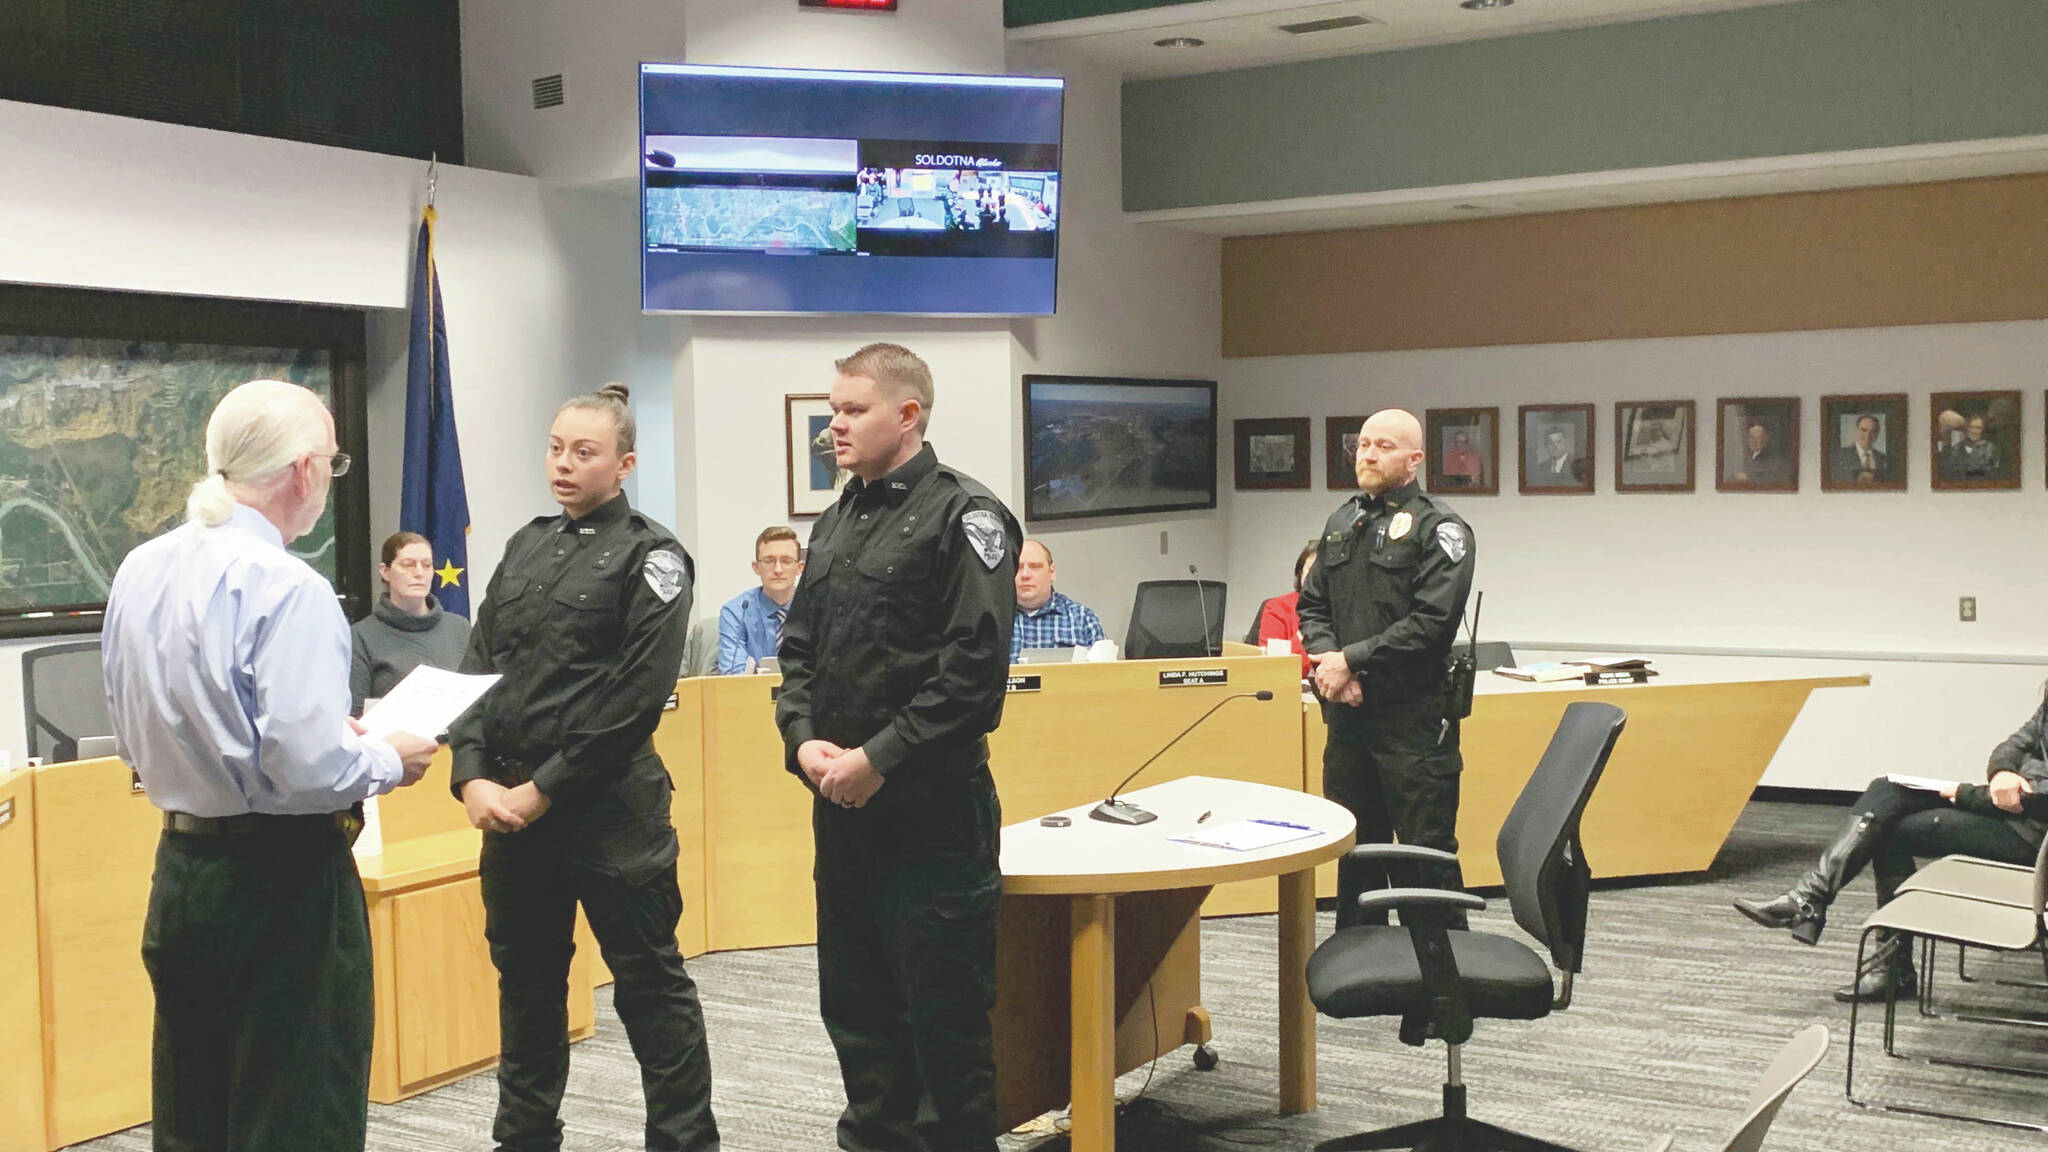 From left, Soldotna Mayor Paul Whitney swears in new Soldotna Police Officers AJ Fresquez and Reid Culver while Police Chief Dale “Gene” Meek looks on during a meeting of the Soldotna City Council on Wednesday in Soldotna. (Ashlyn O’Hara/Peninsula Clarion)